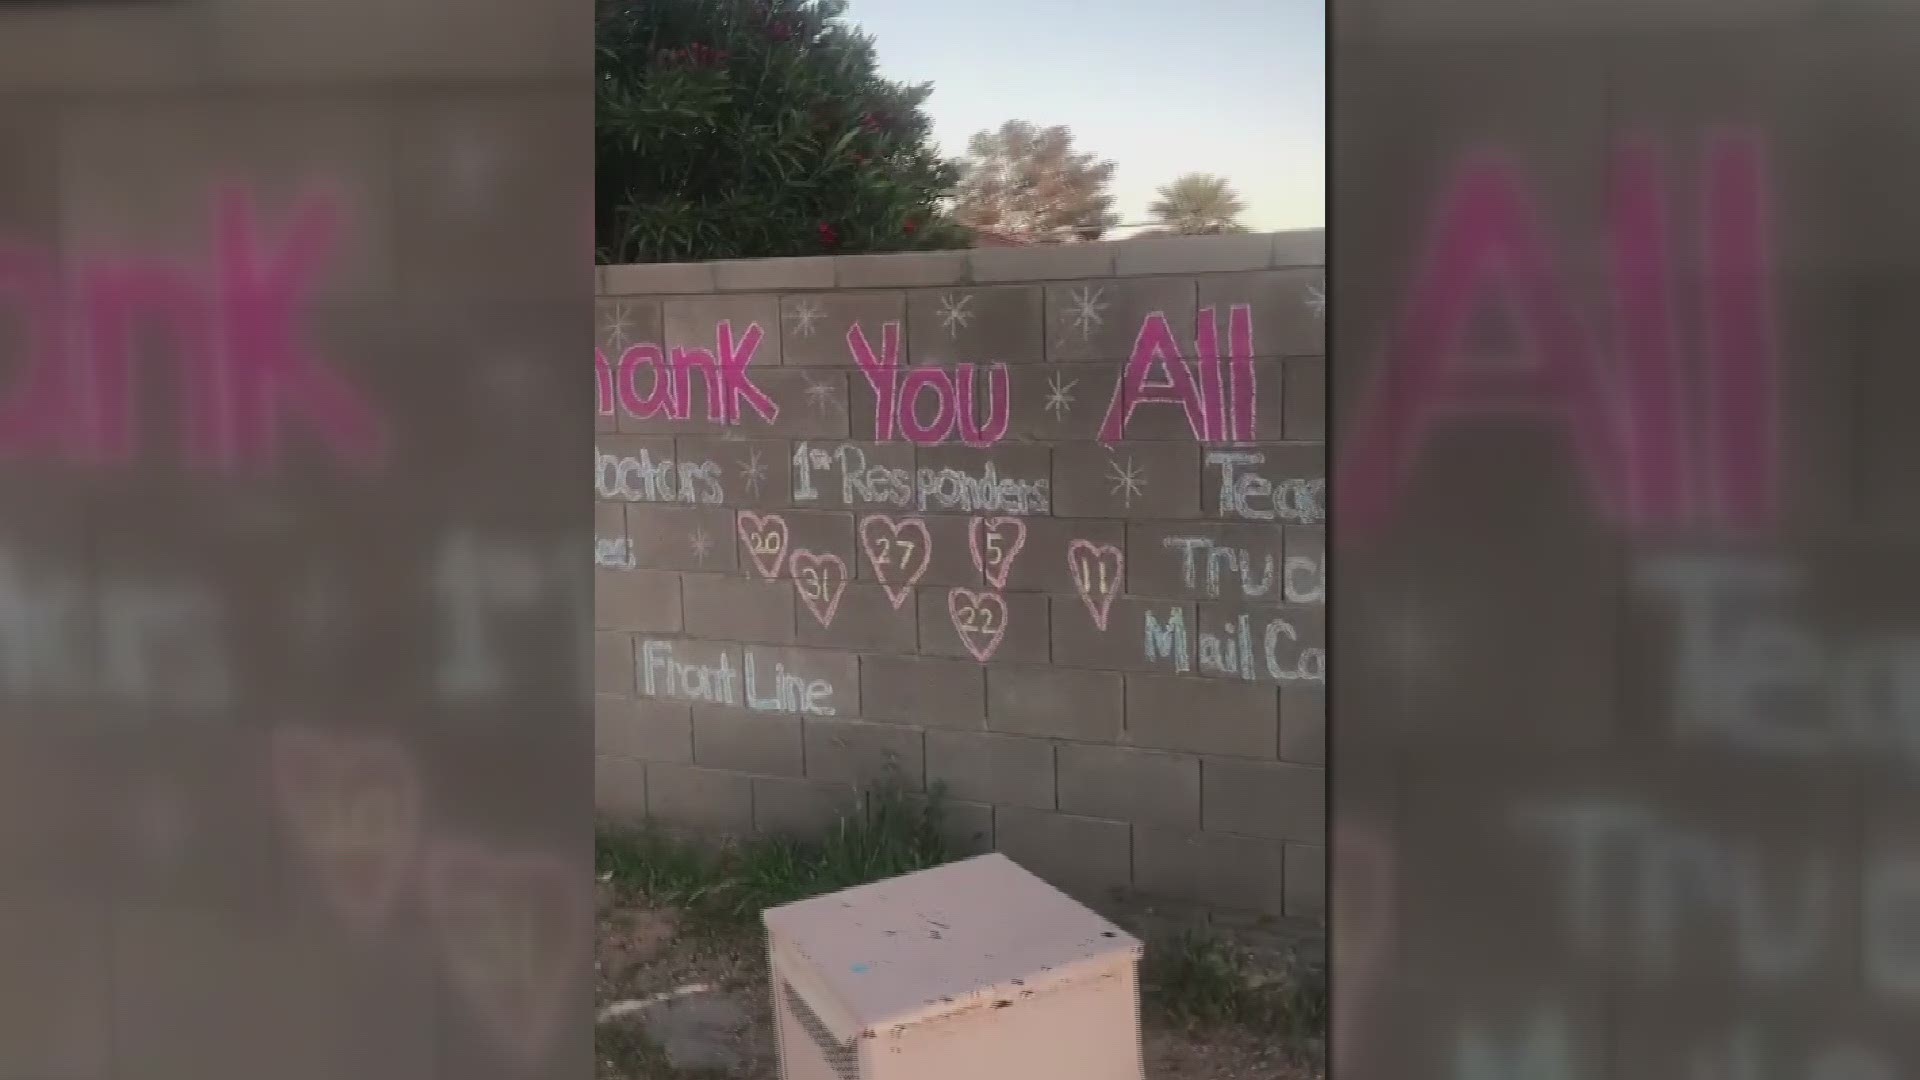 A stay-at-home order in Arizona is keeping families at home but that doesn't mean people can't still send the love to others